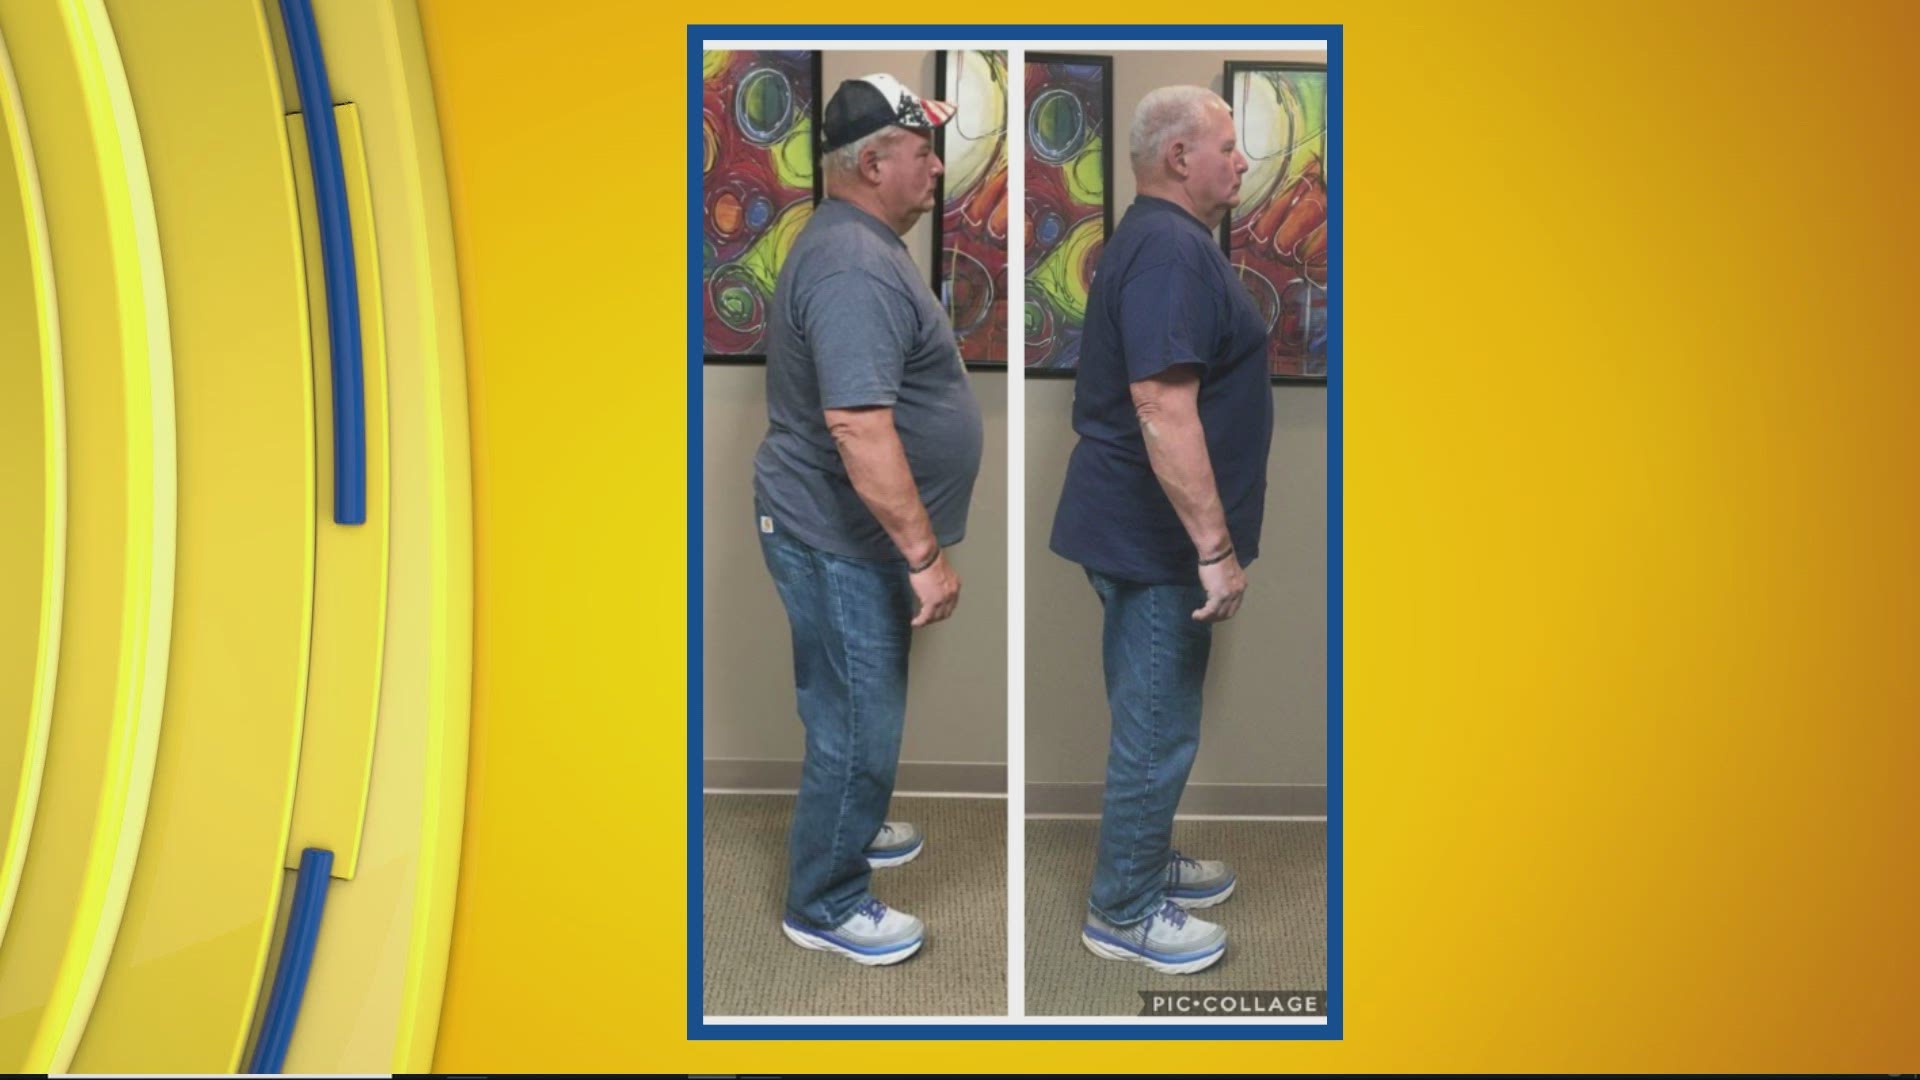 Ron lost 58 pounds with Dr. Vince Hassel's weight loss program!